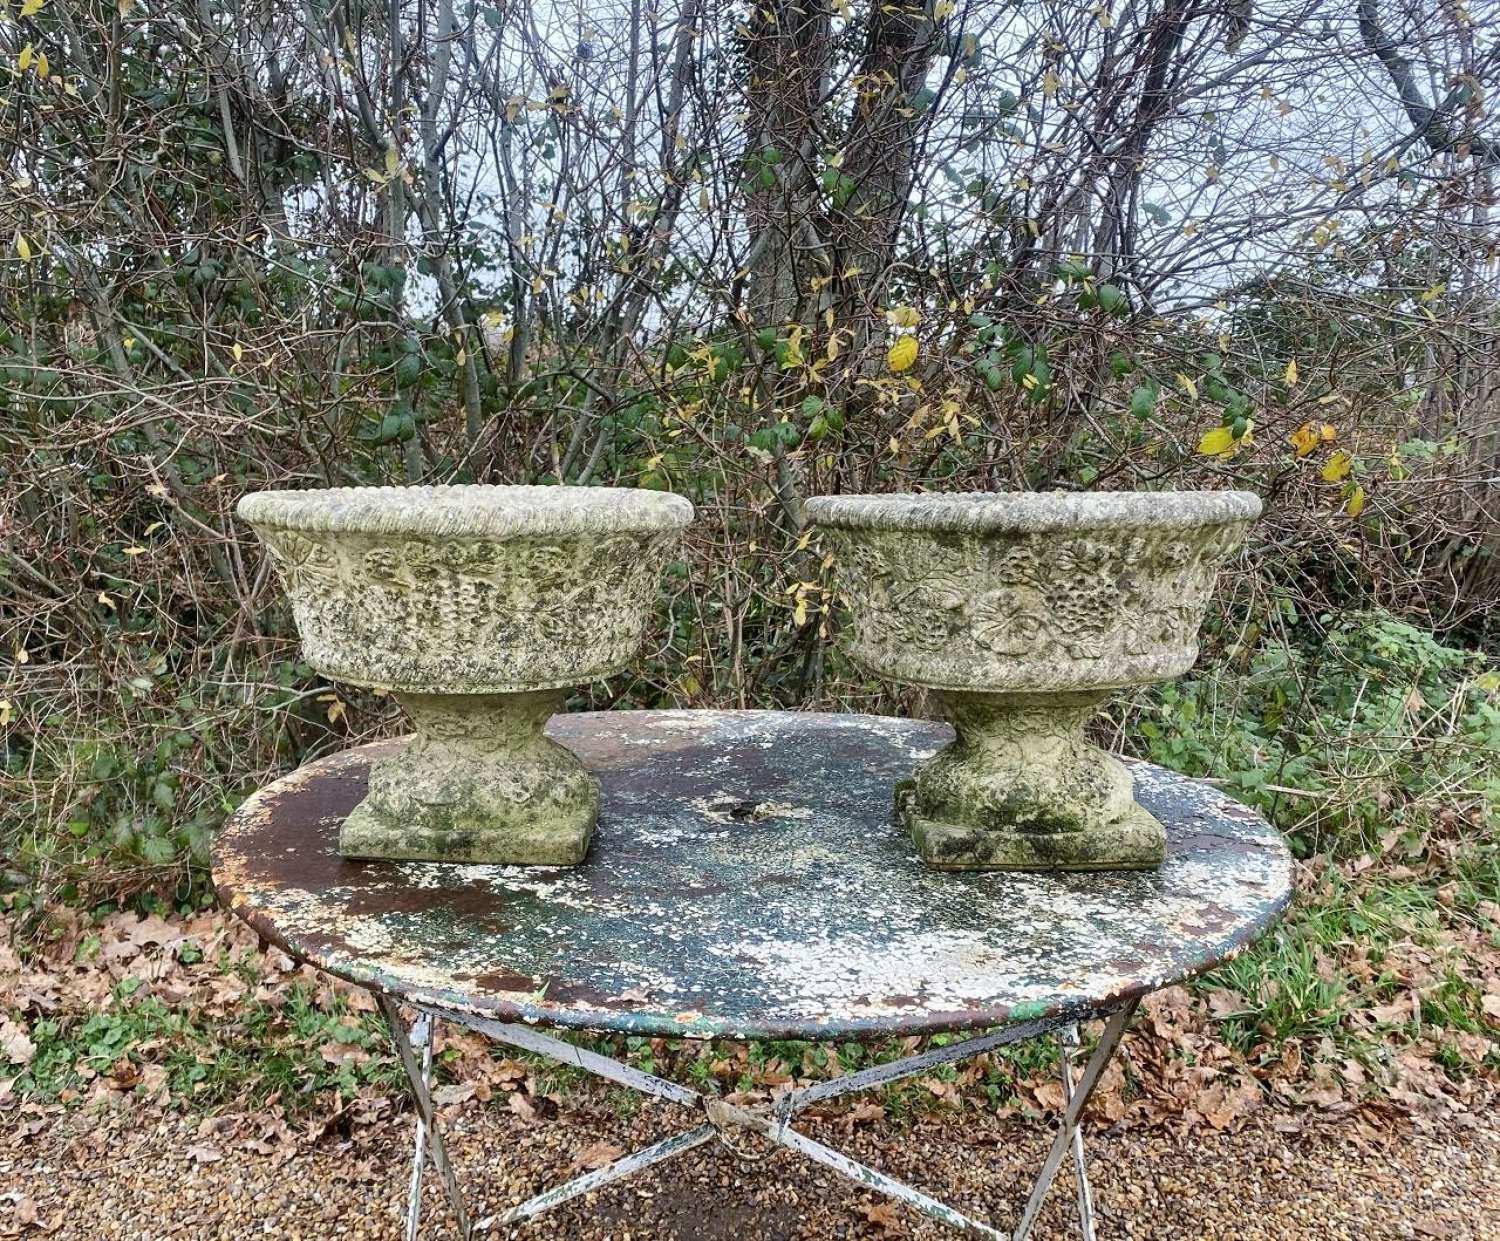 Pair of Floral Urns